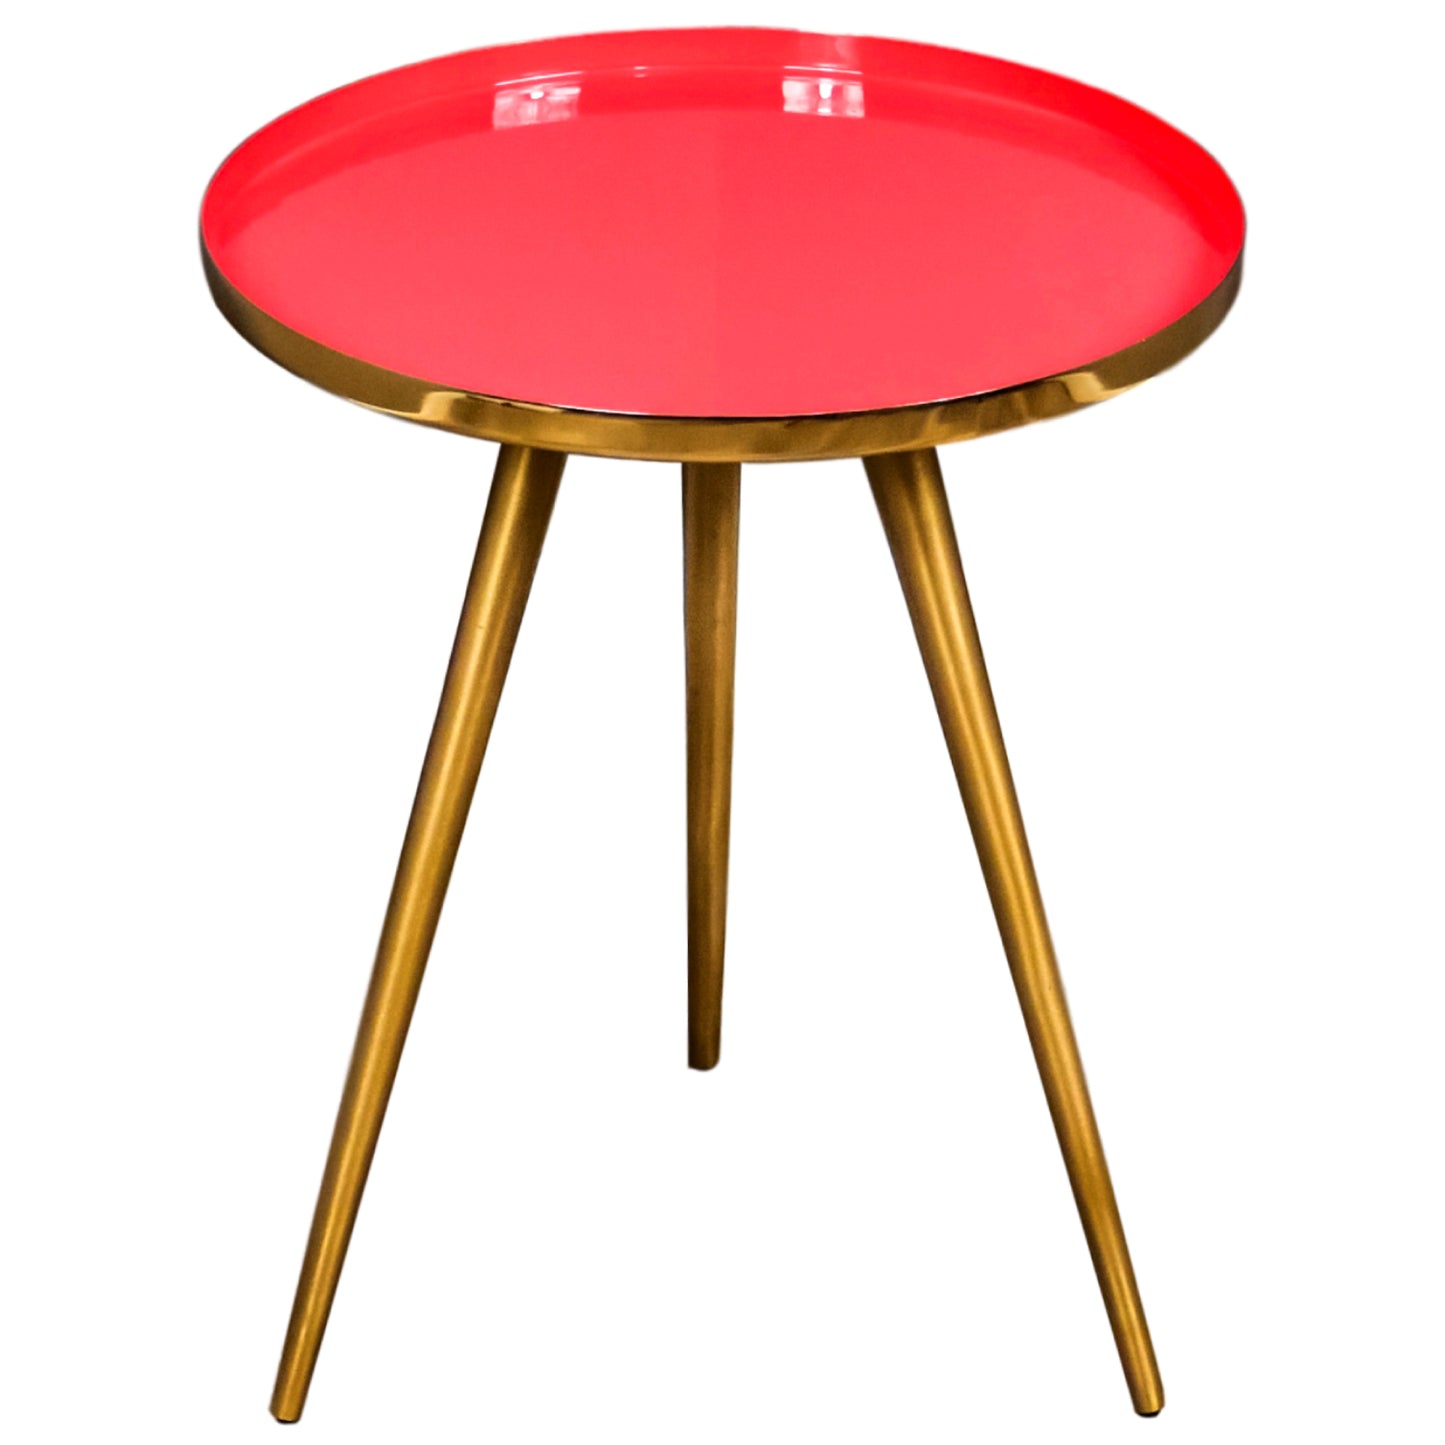 Side table coral enamel tray by Native